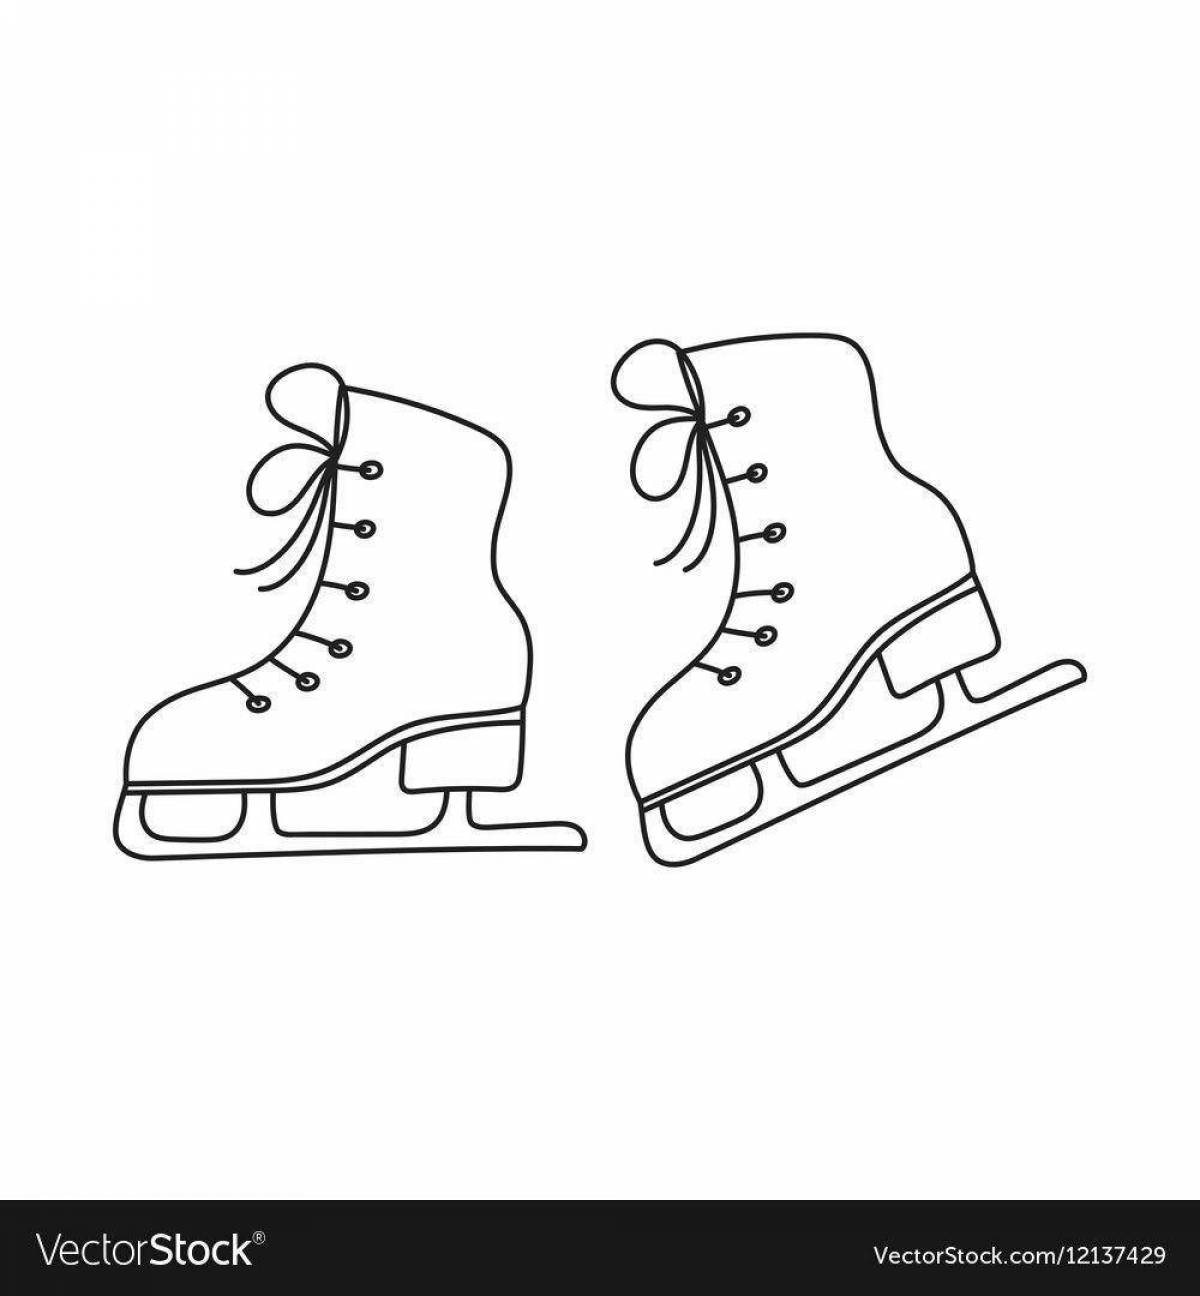 Gorgeous skates coloring book for children 5-6 years old